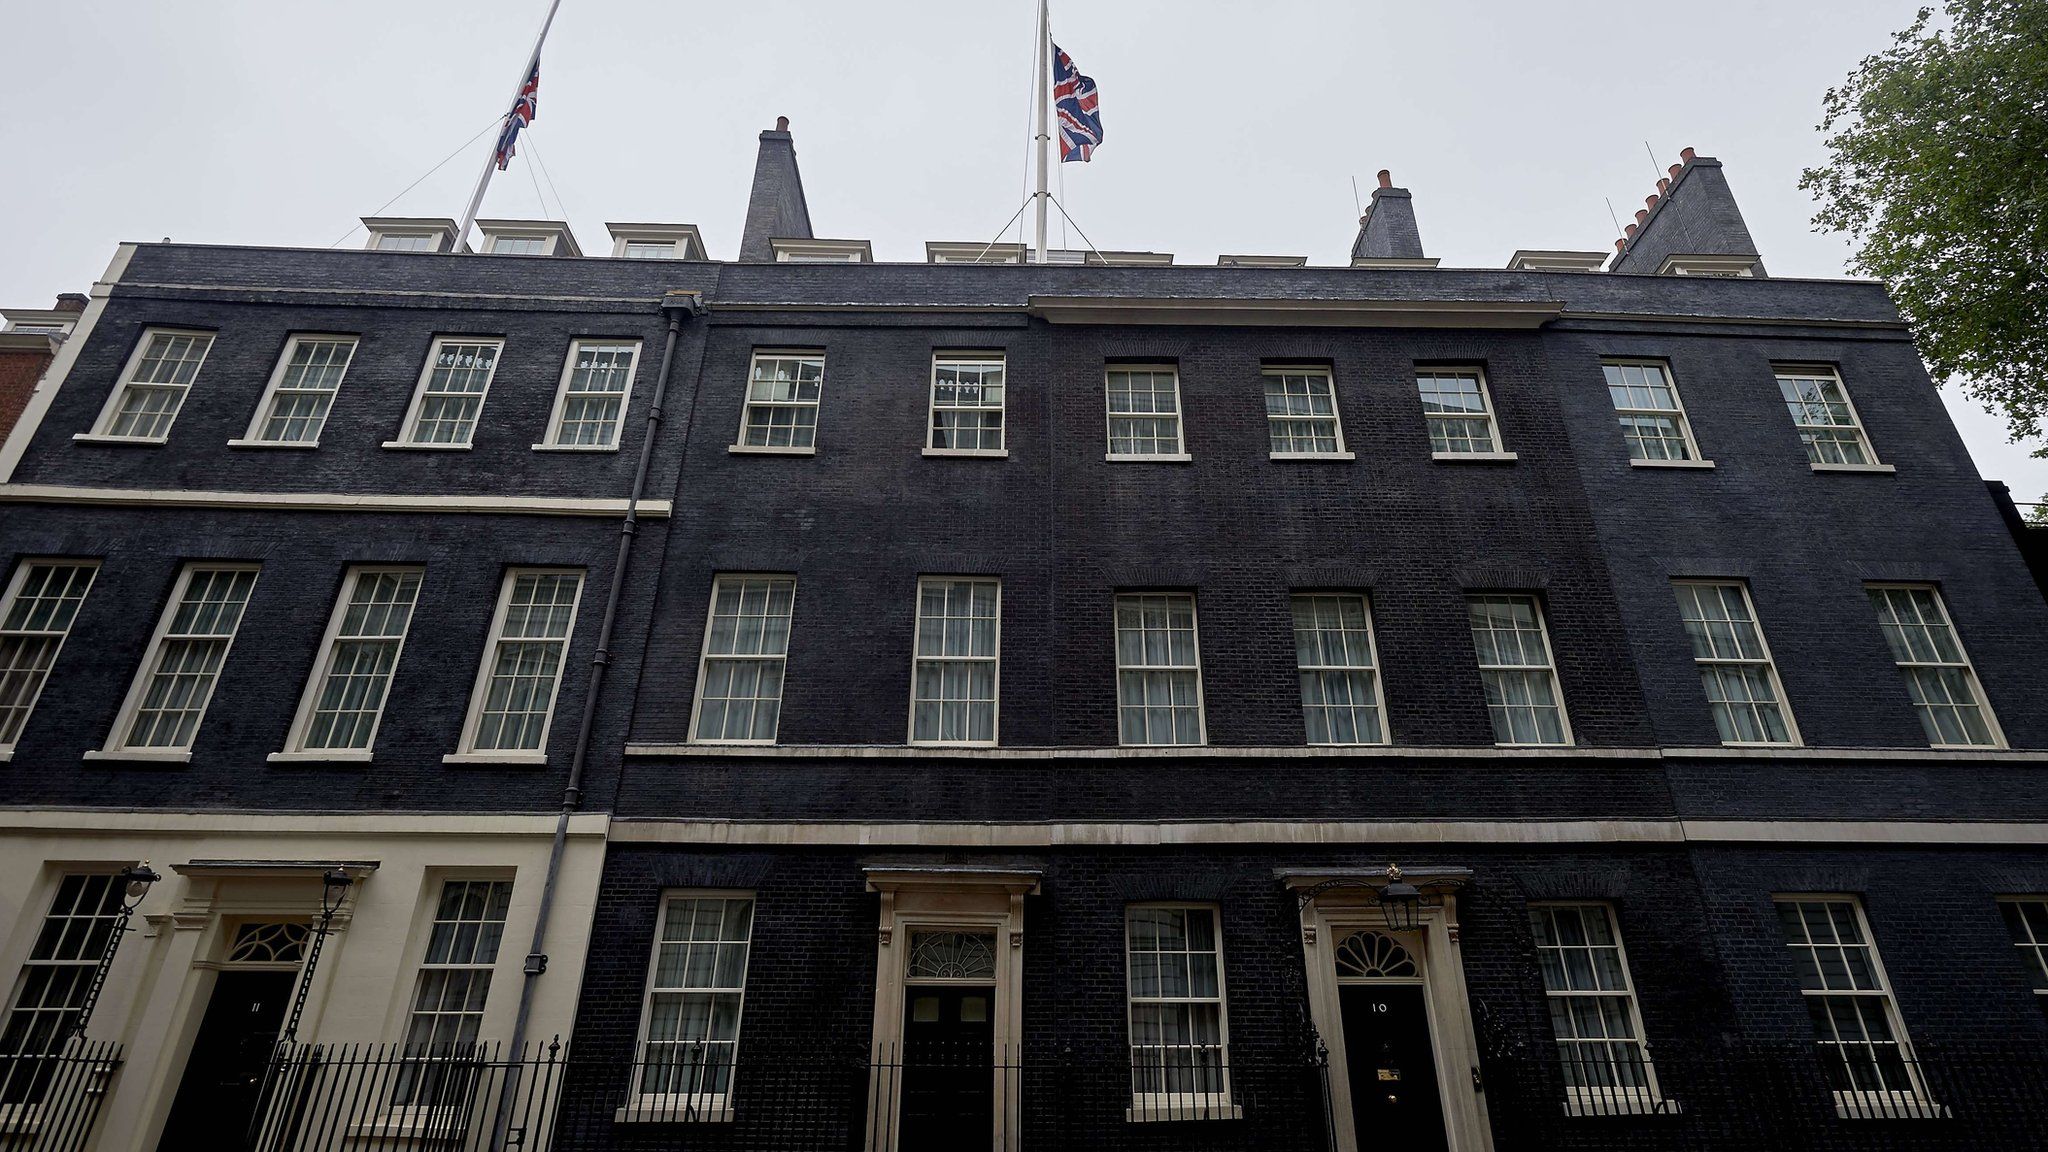 Downing Street flag flies at half mast for the Tunisian beach attack victims